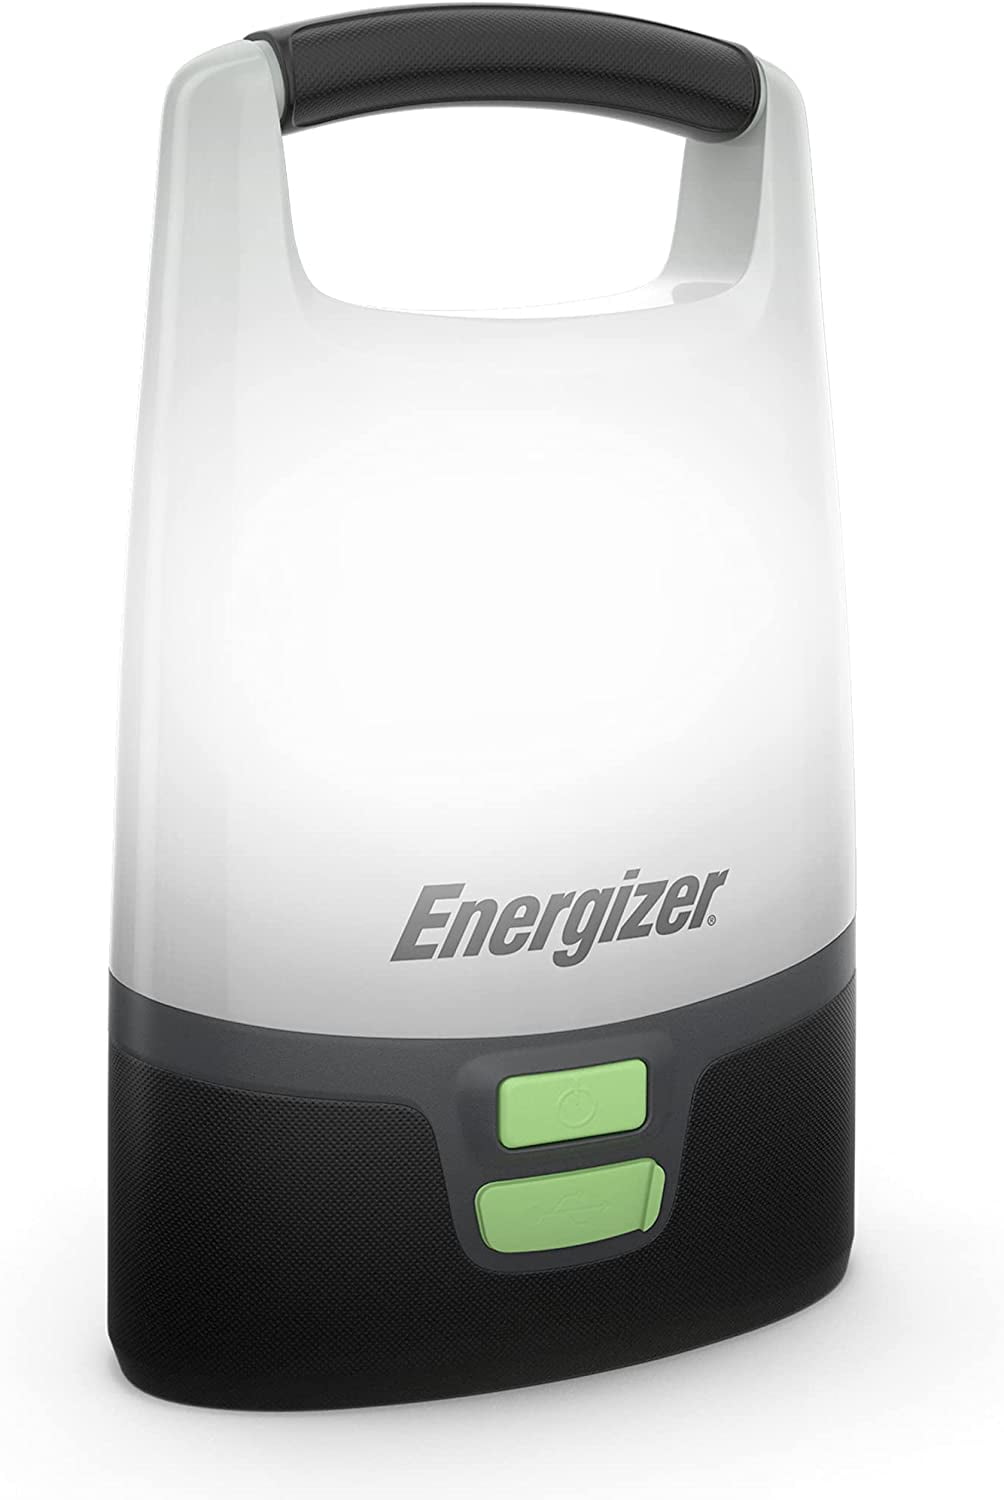 Energizer Vision LED Lantern, Versatile Camping Lantern, Emergency Light or  Outdoor Light, USB Port to Charge Devices